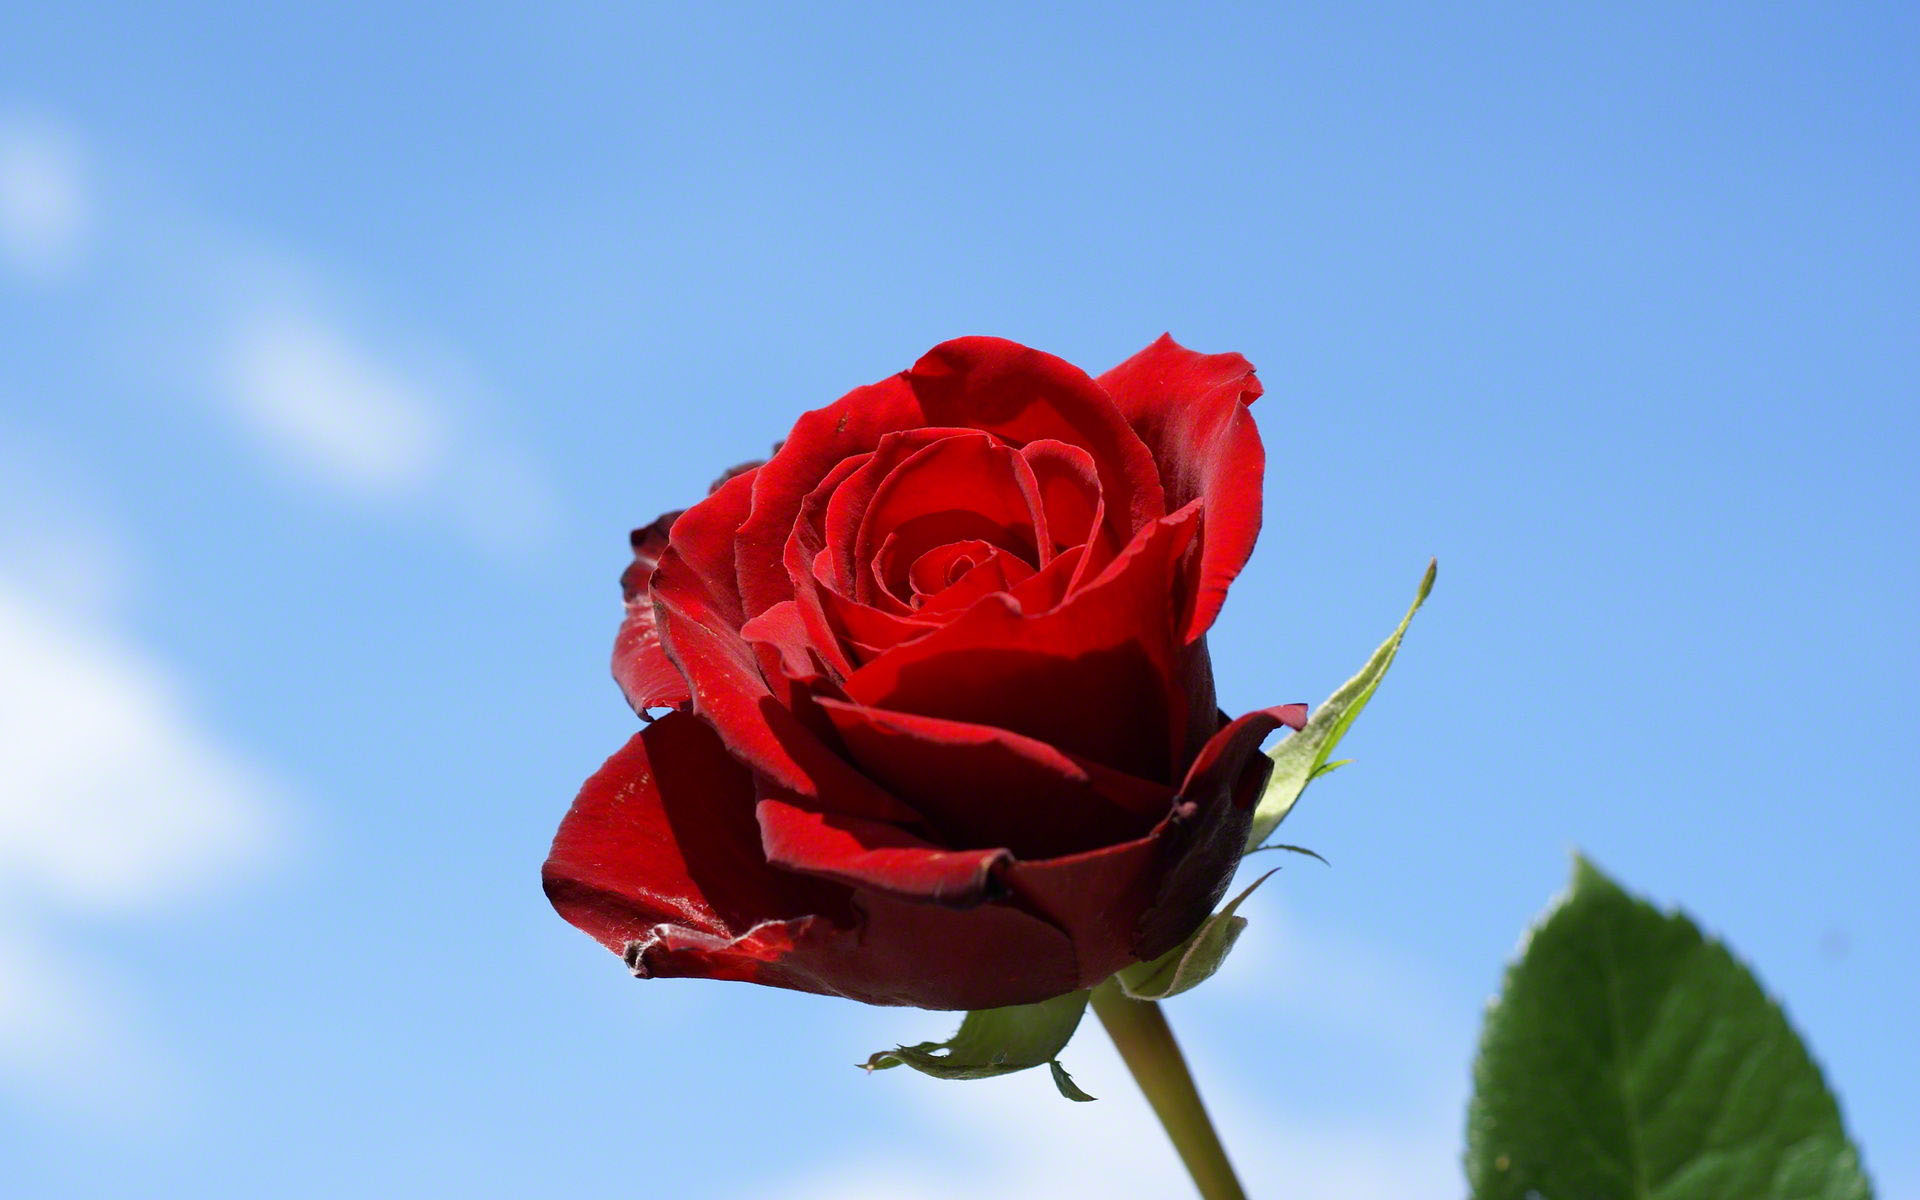 Red Rose With Blue Background wallpaper - 3044